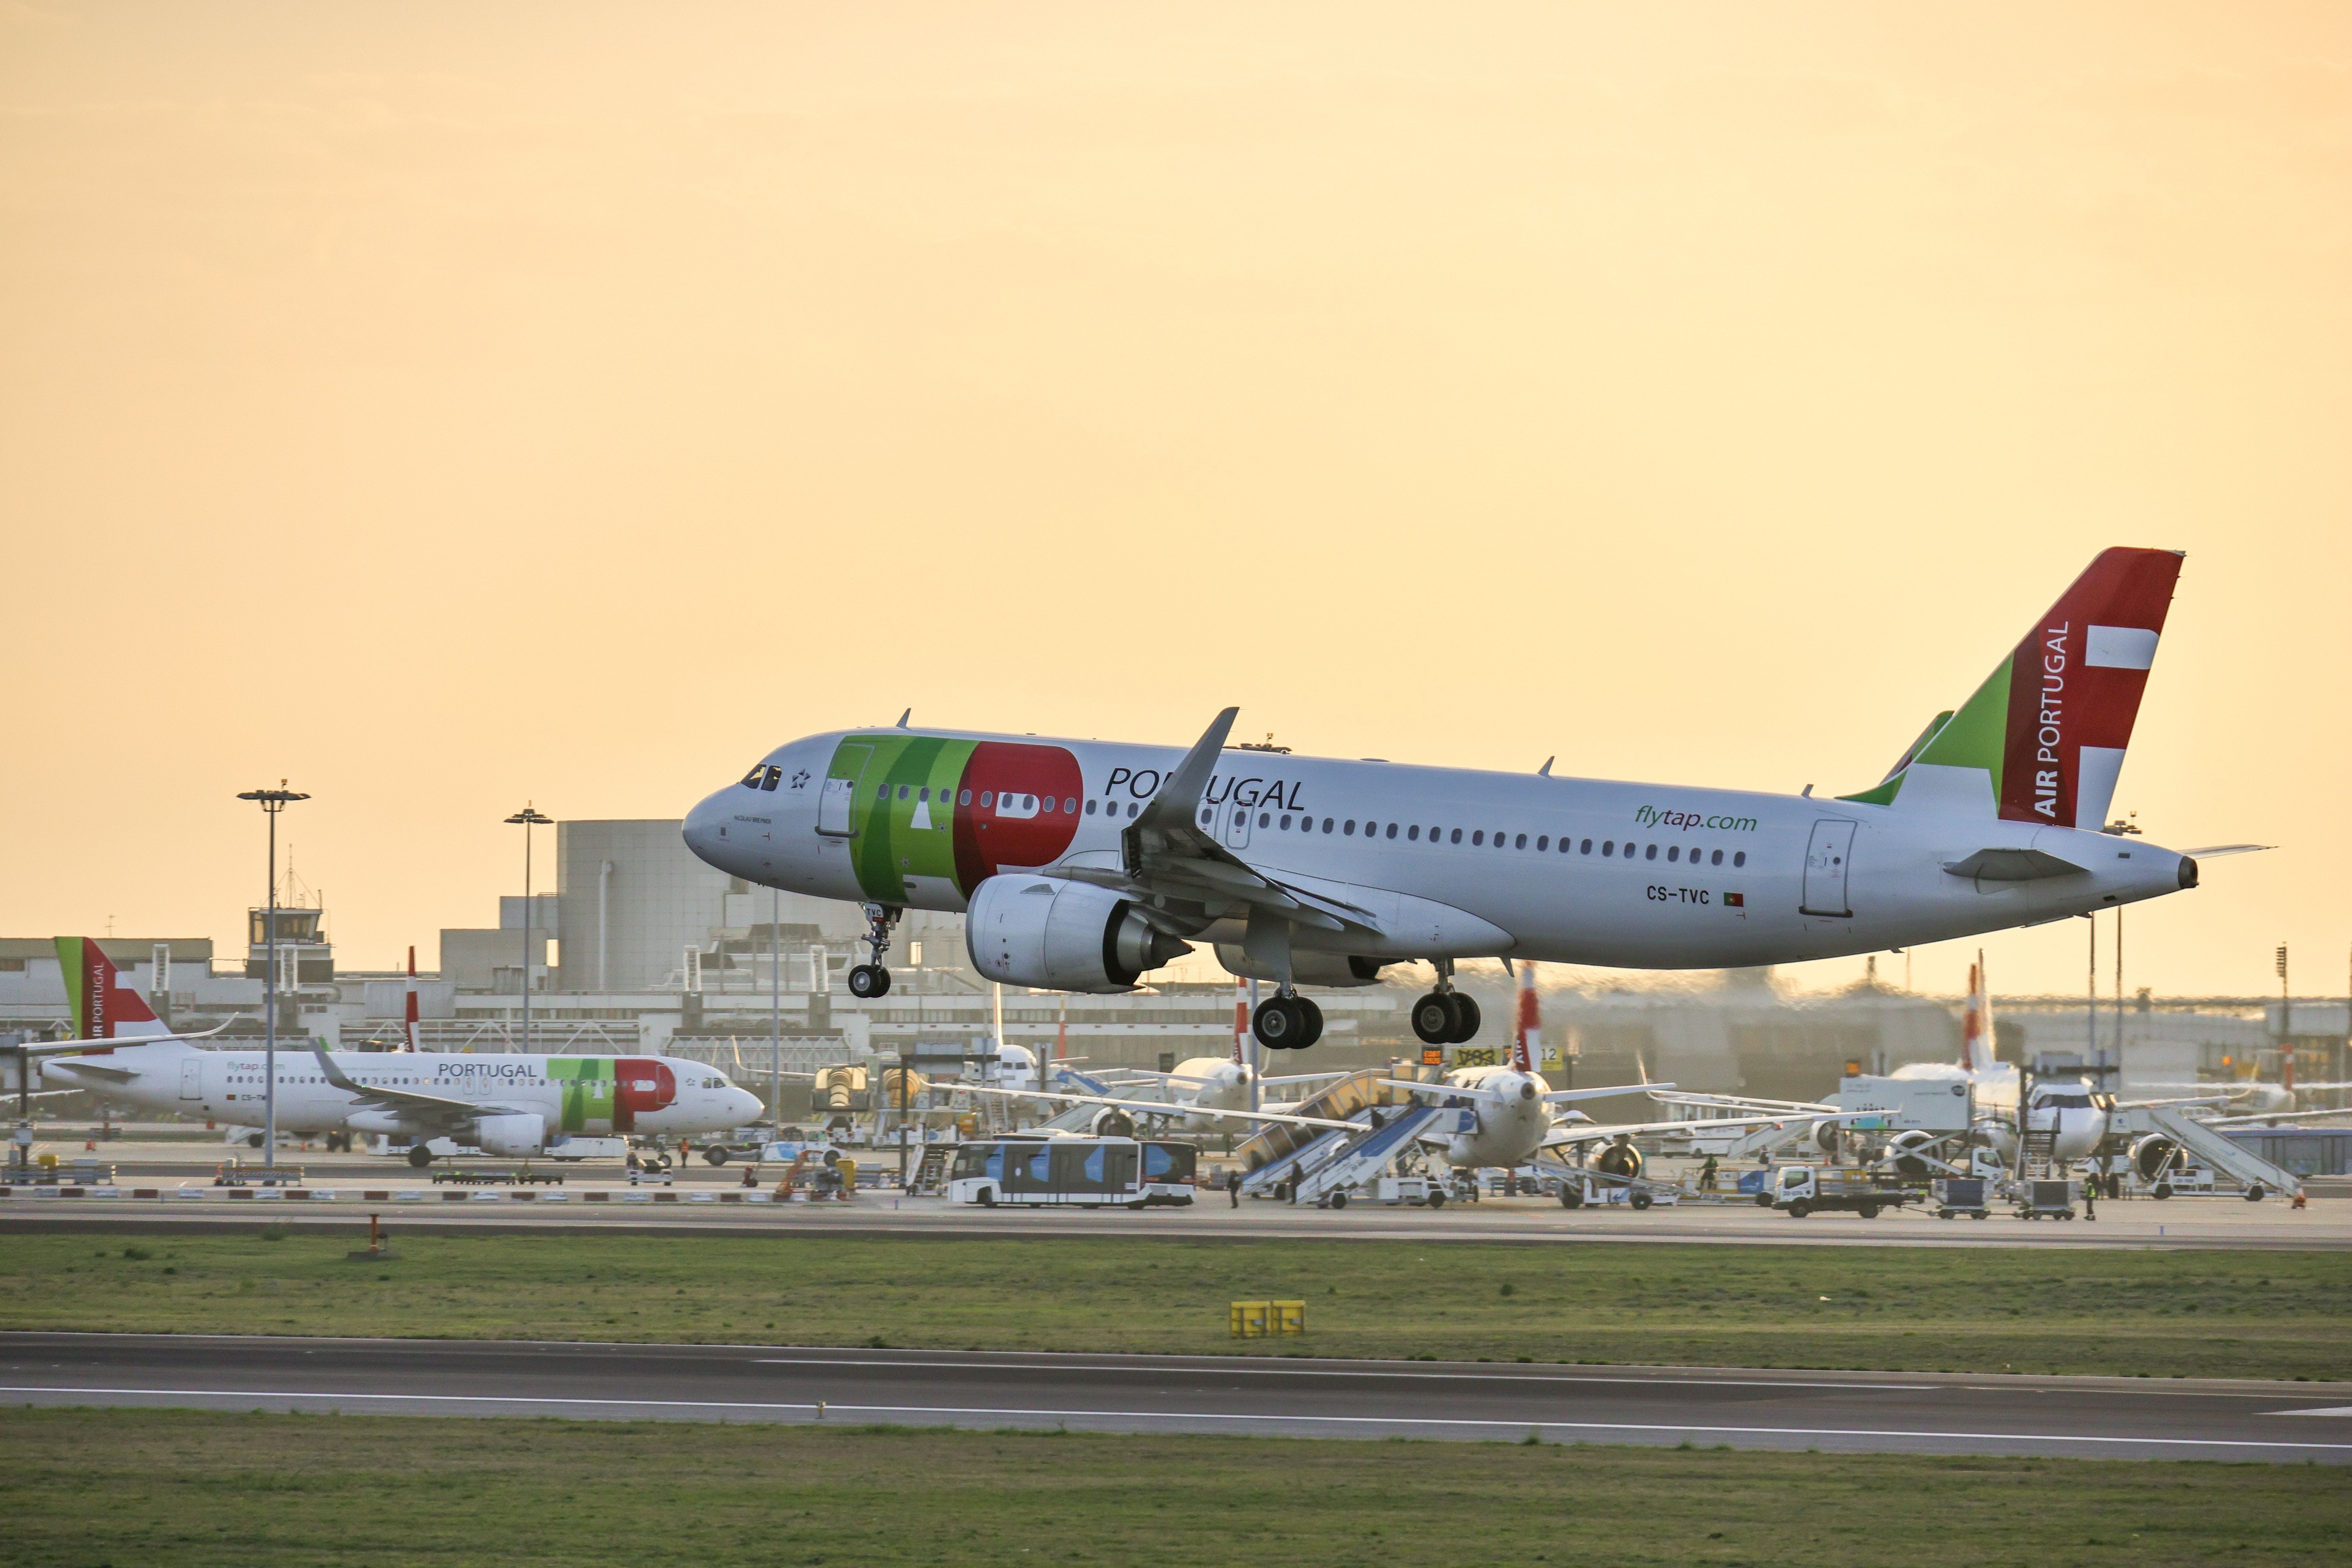 A side view of the TAP Air Portugal airplane departing from Humberto Delgado Airport at sunset